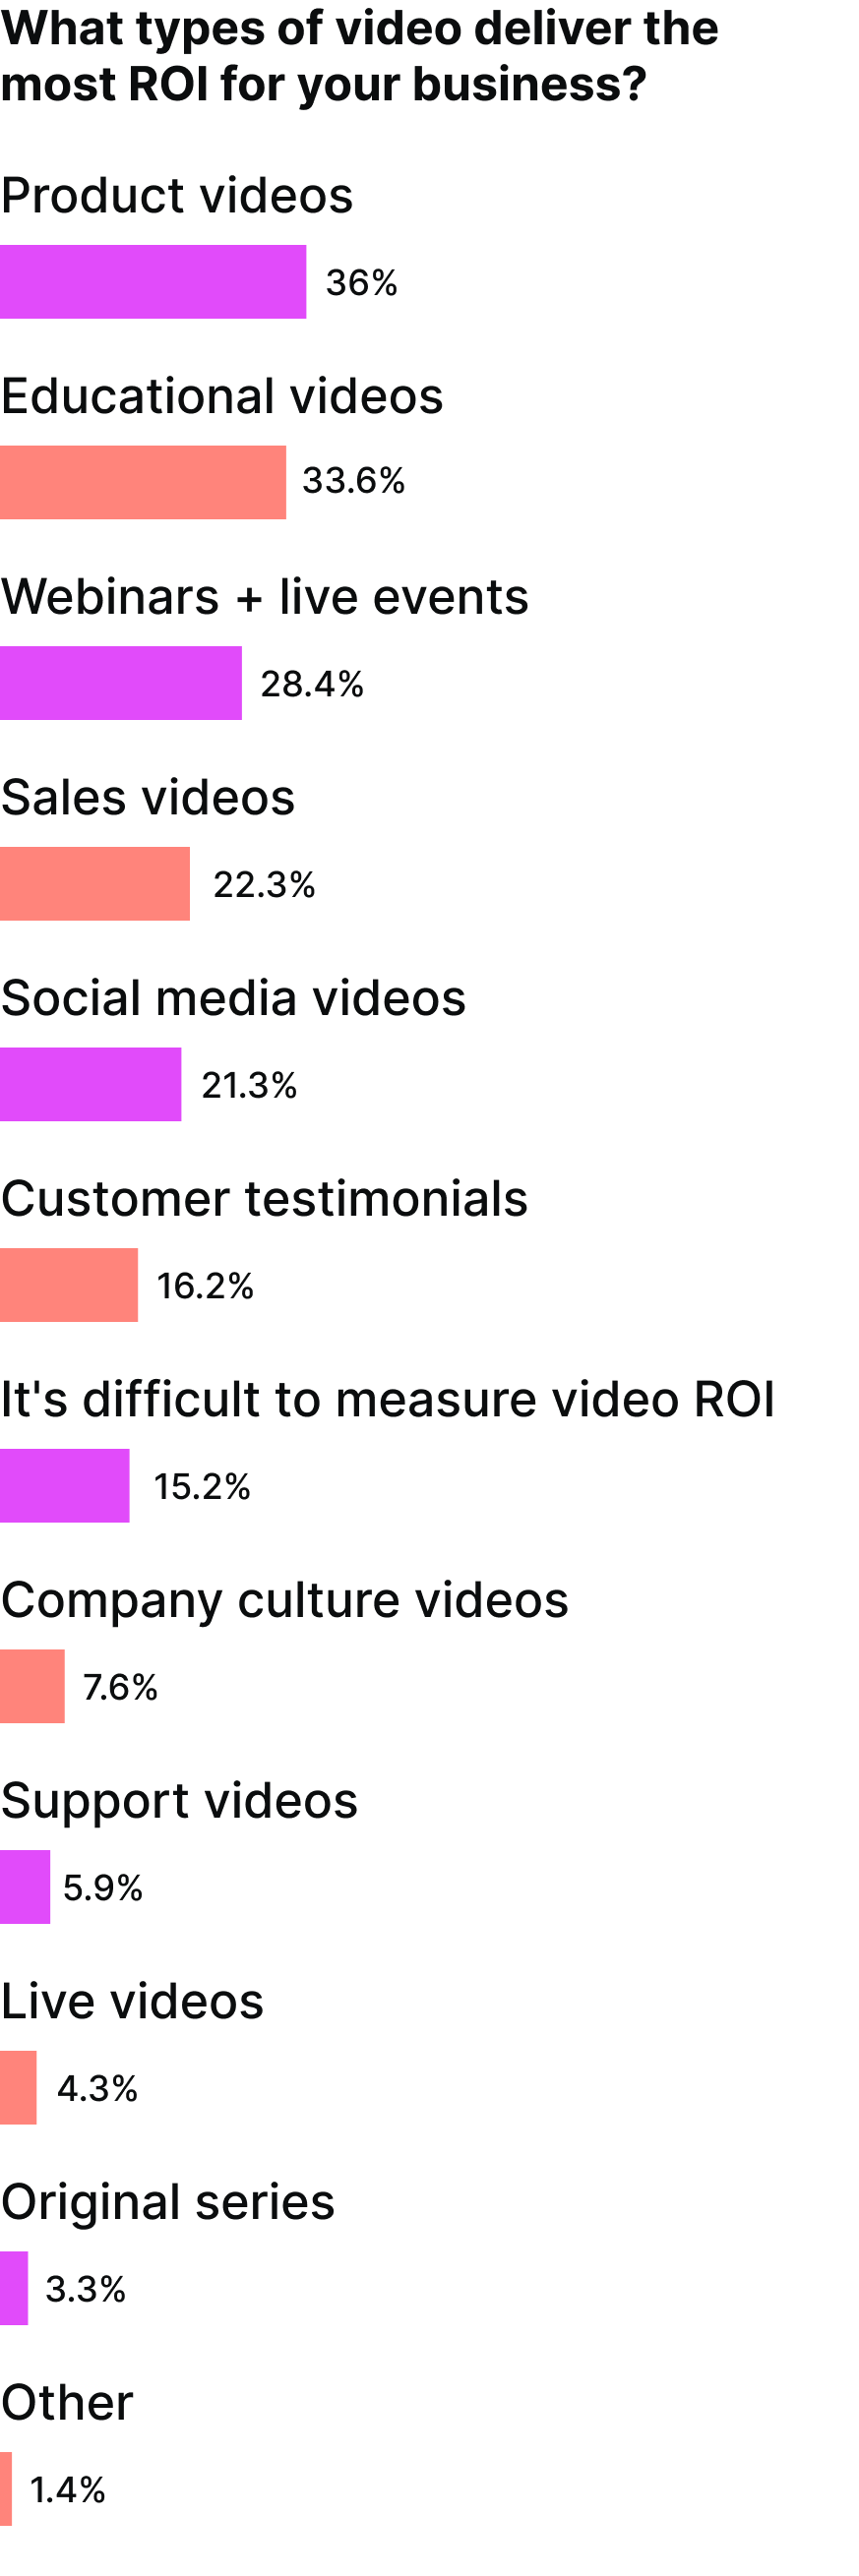 What types of video deliver the most ROI for your business?
Product Videos - 36%
Educational Videos - 33.6%
Webinars + Live Events - 28.4%
Sales Videos - 22.3%
Social Media Videos - 21.3%
Customer Testimonials - 16.2%
It's difficult to measure ROI - 15.2%
Company Culture Videos - 7.6%
Support Videos - 5.9%
Live Videos - 4.3%
Original Series - 3.3%
Other - 1.4%